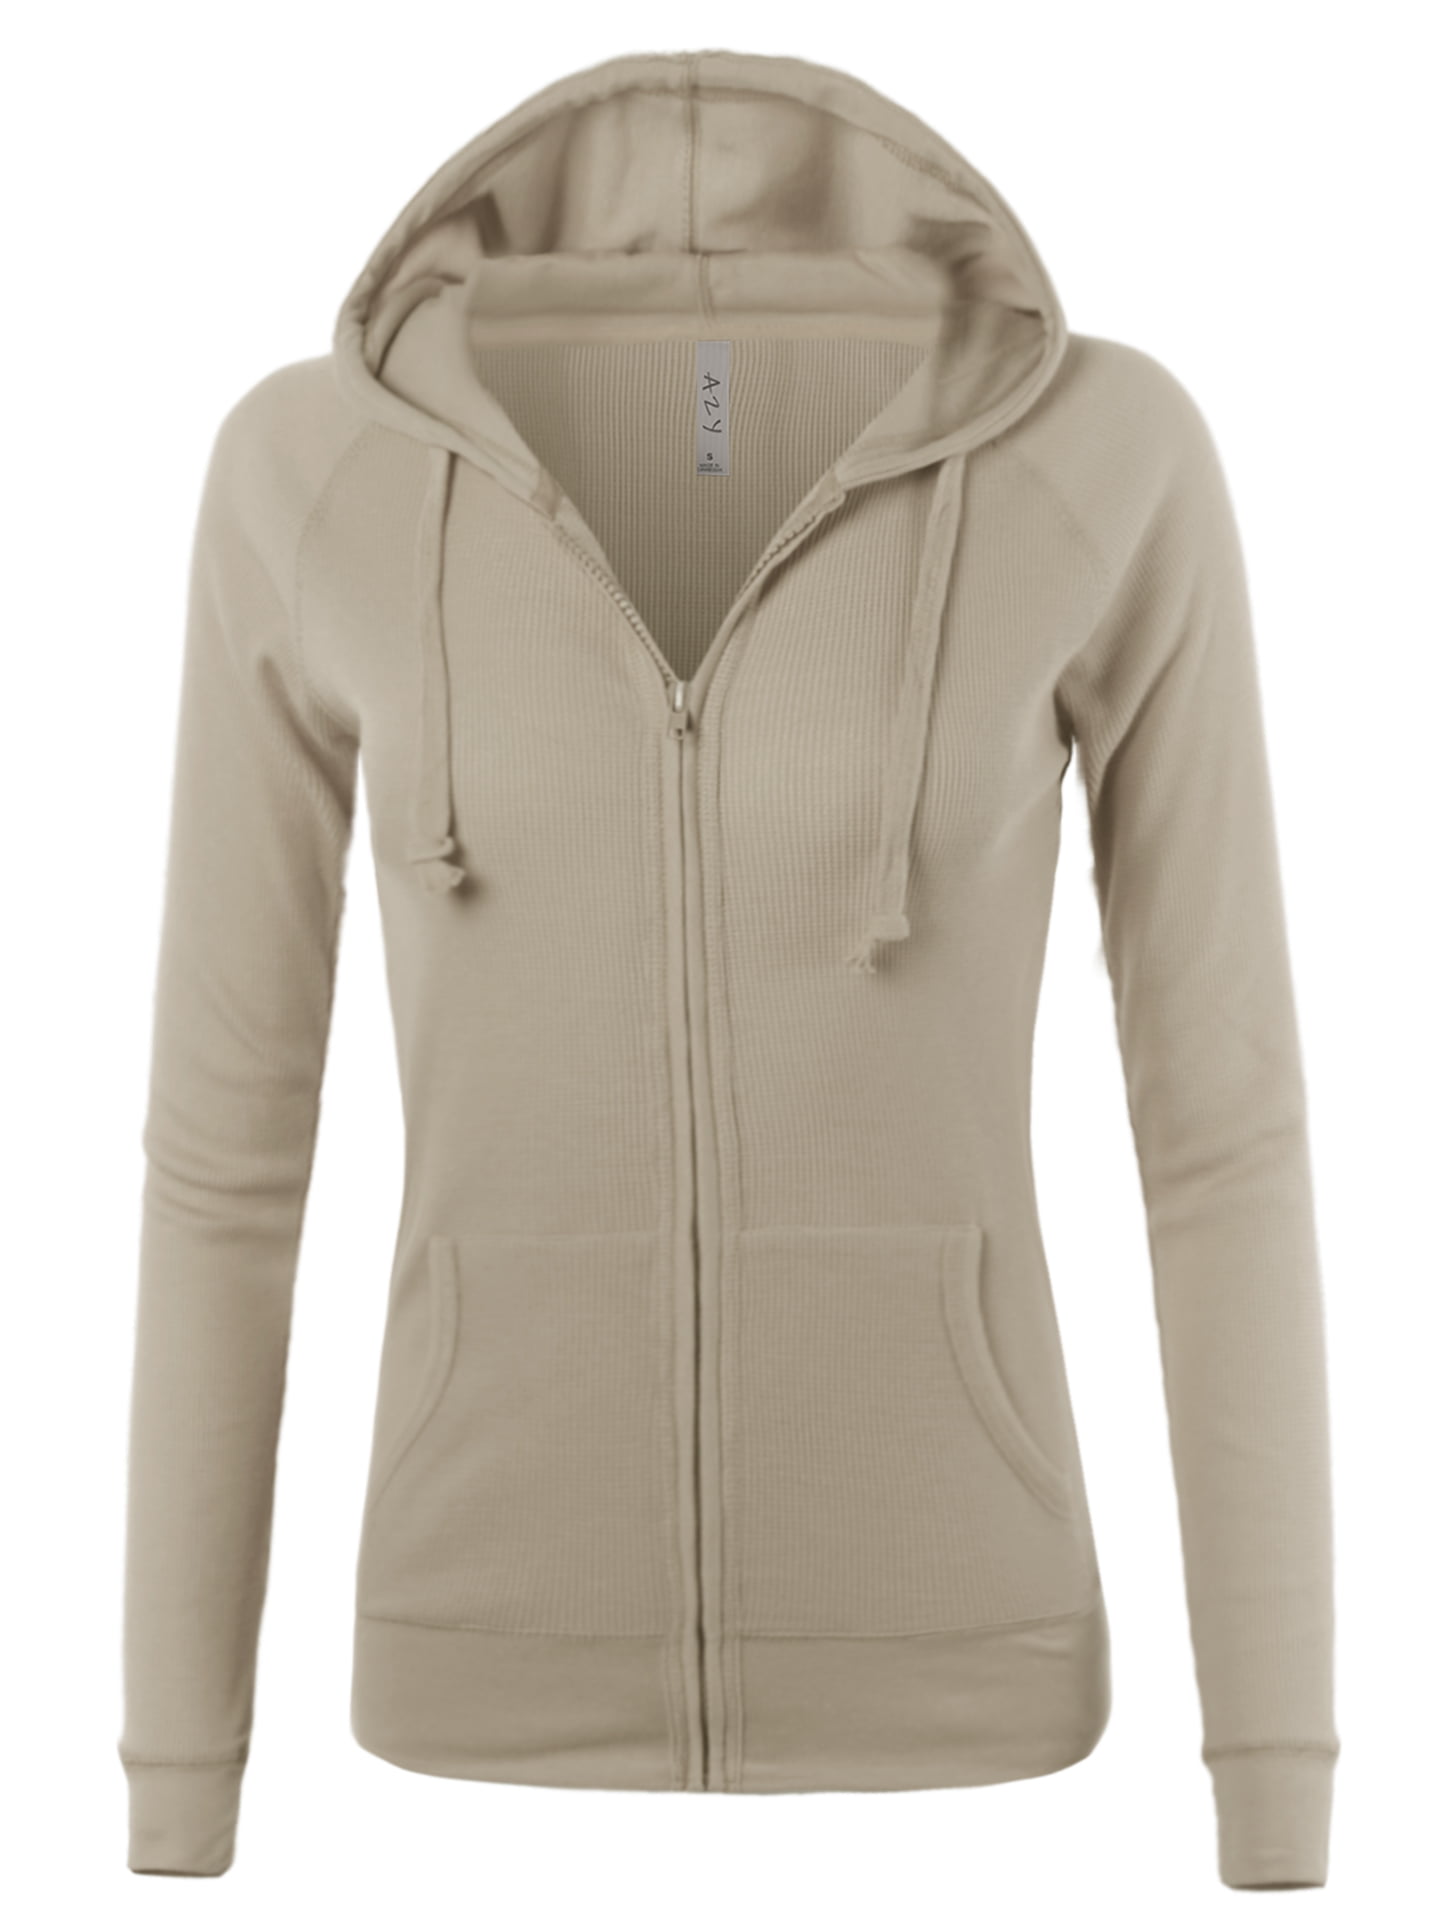 A2Y - A2Y Women's Casual Fitted Lightweight Pocket Zip Up Hoodie Khaki ...